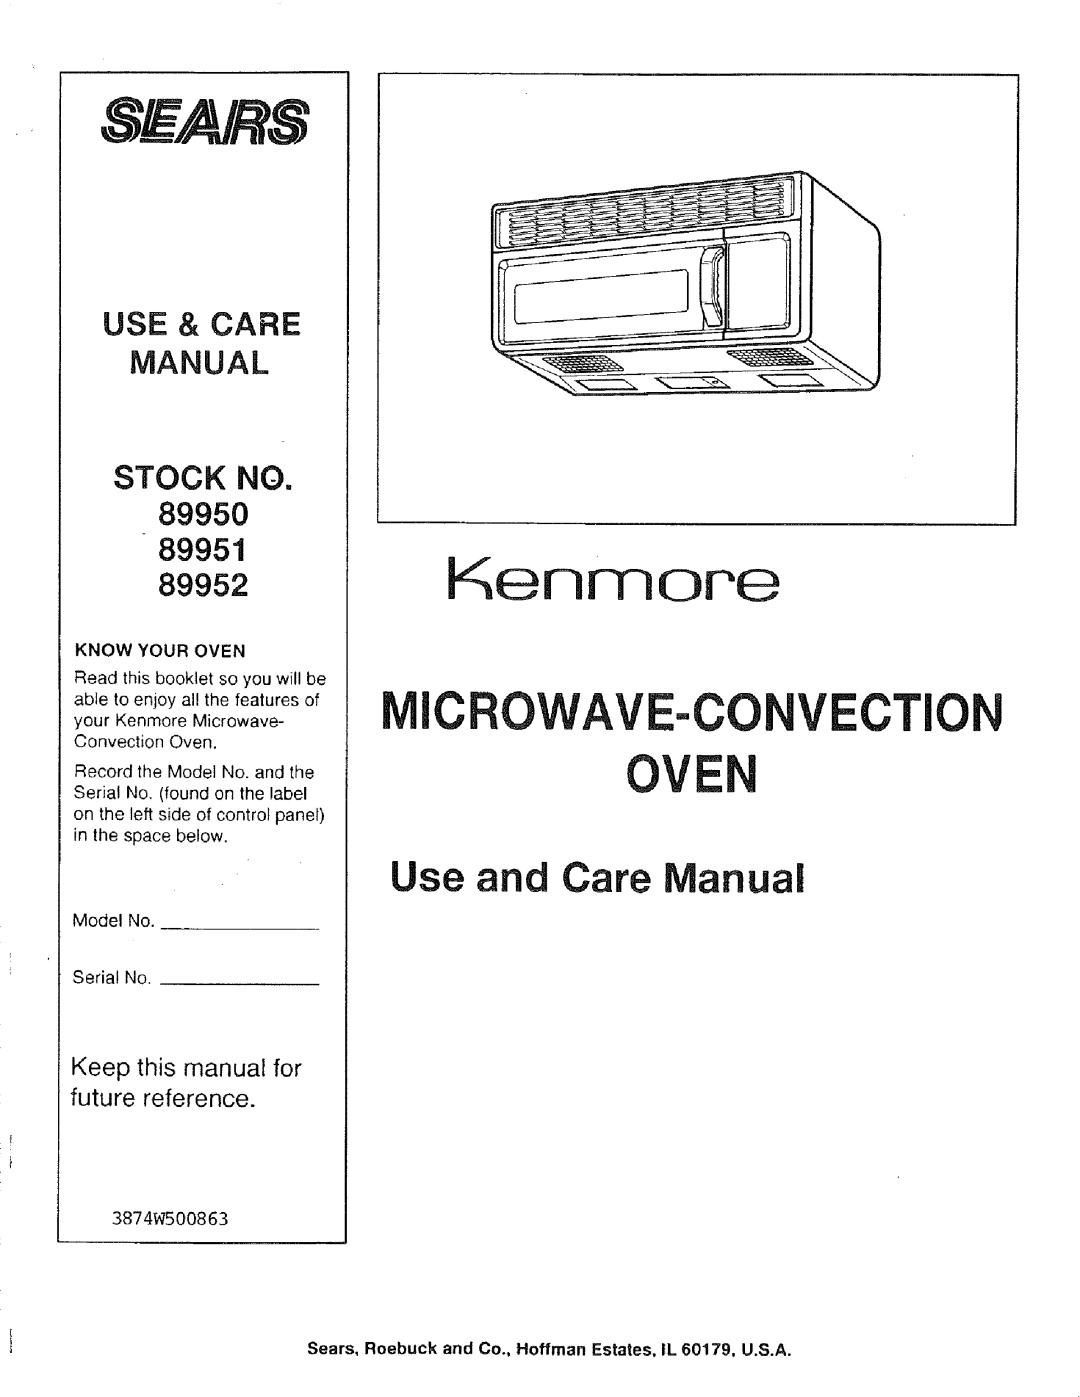 Sears manual Kenmore, Icrowave-Convectionove, Use and Care nual, Use & Care, Manual, STOCK NO. 89950 89951, S_S/Avrs 